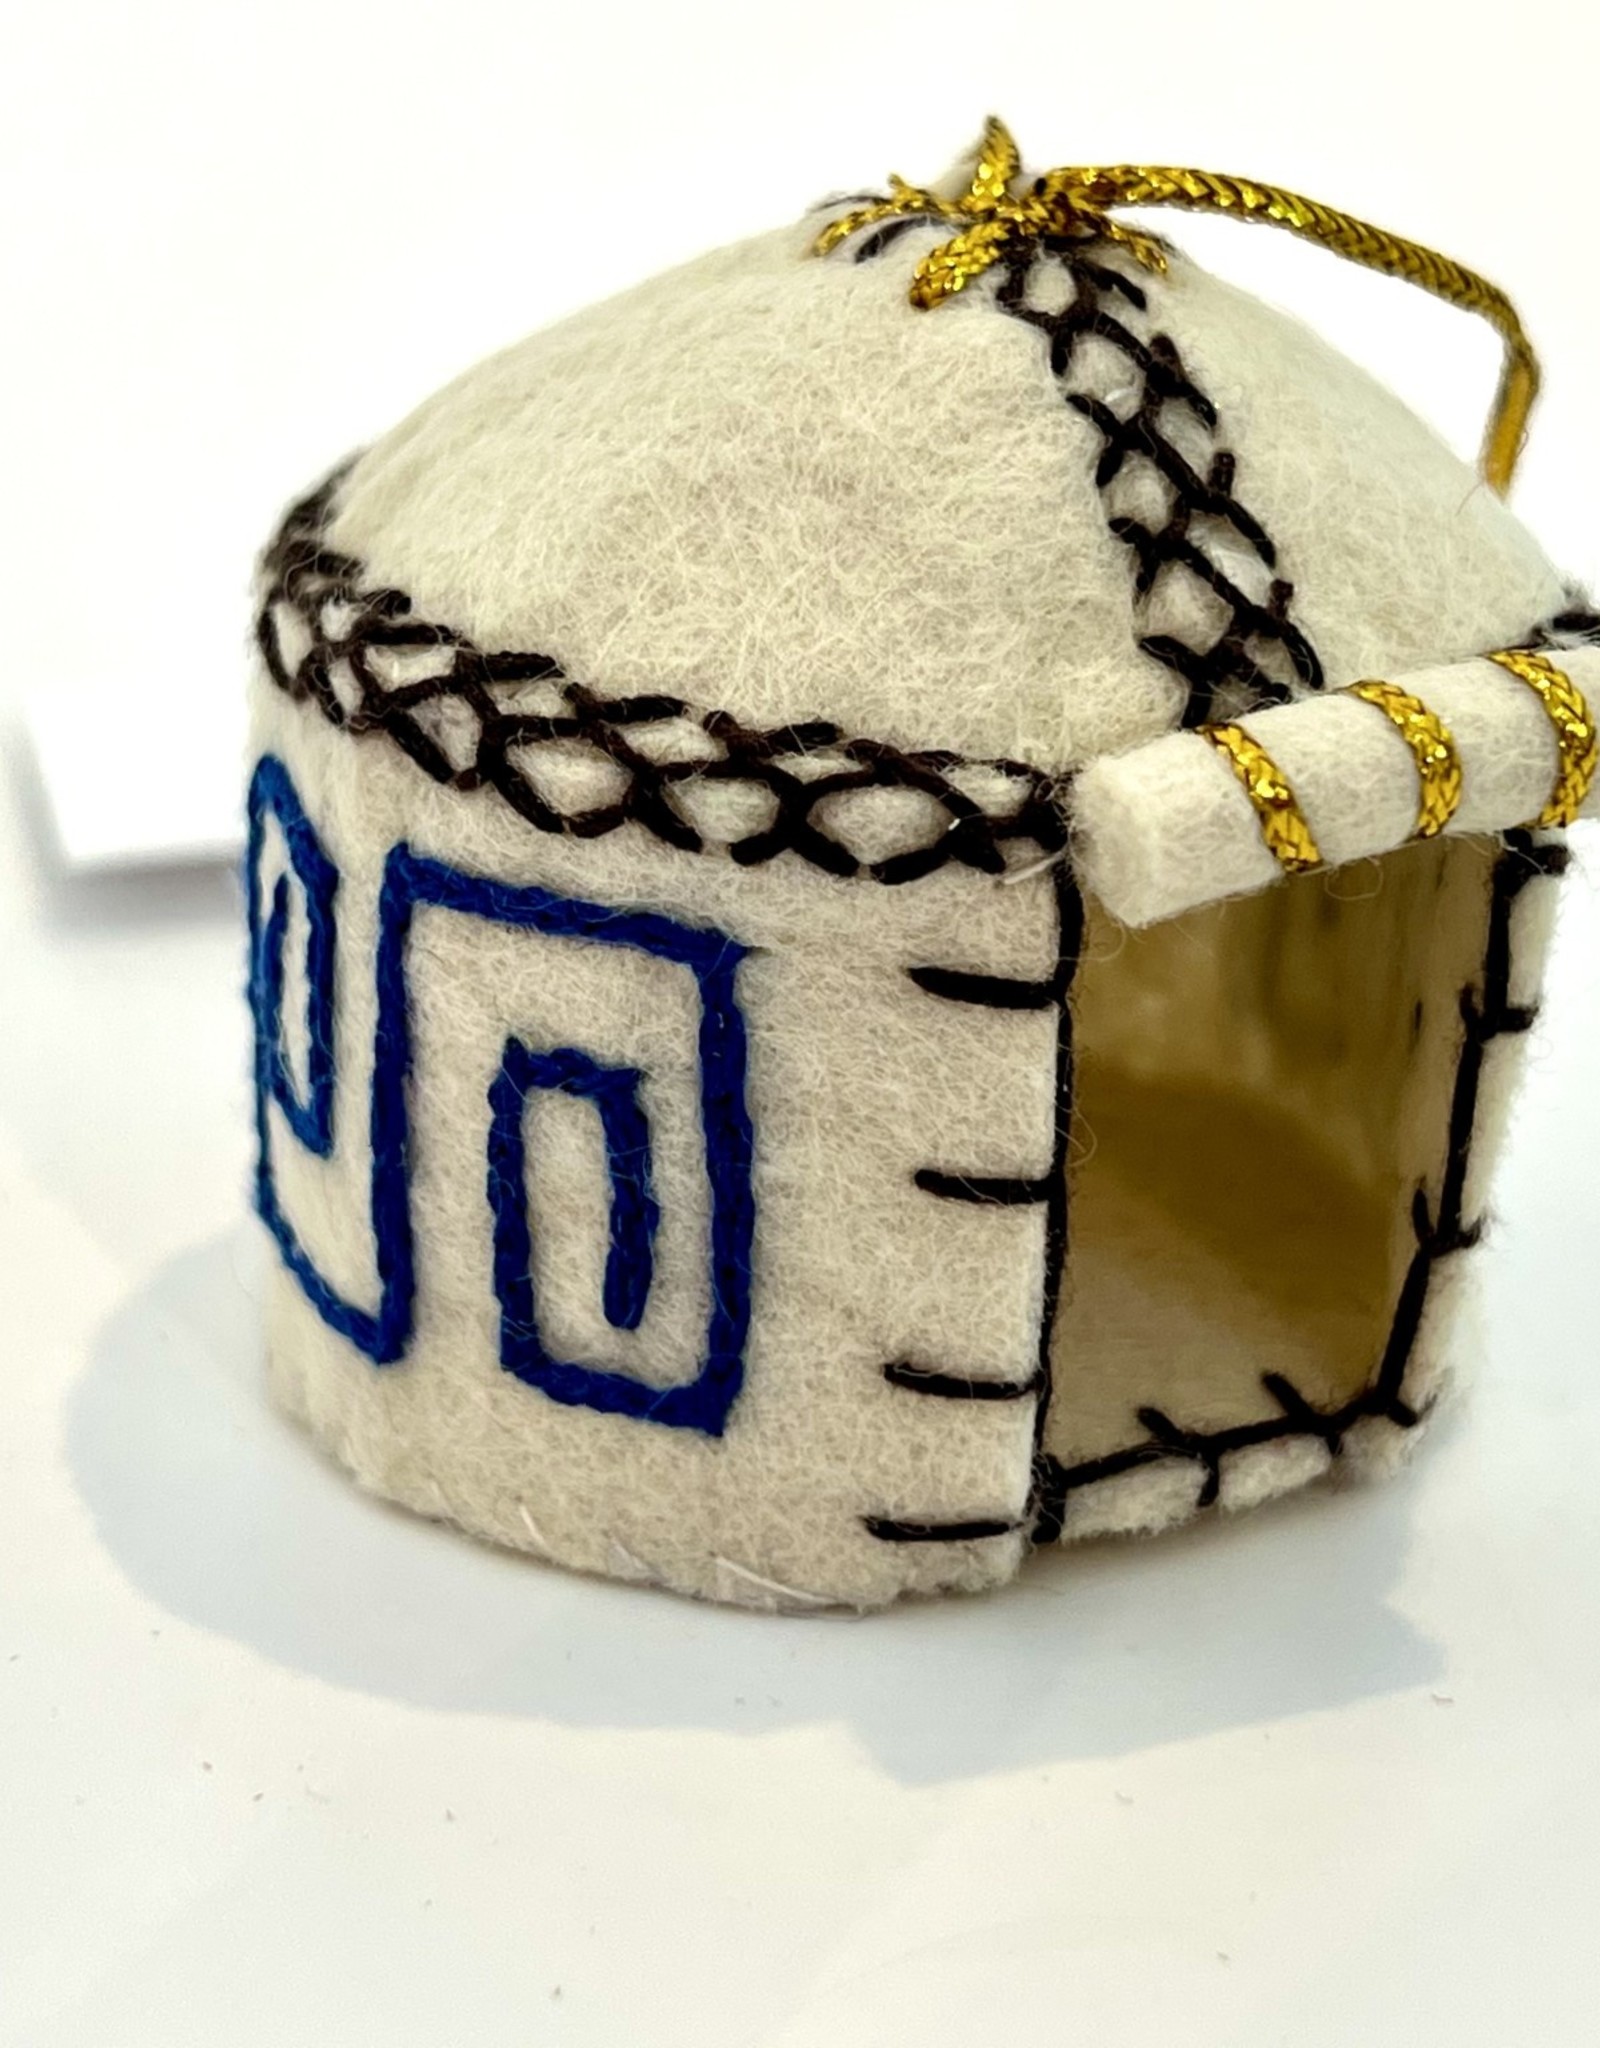 J127 Ranch Yurt Ornament - White and Blue